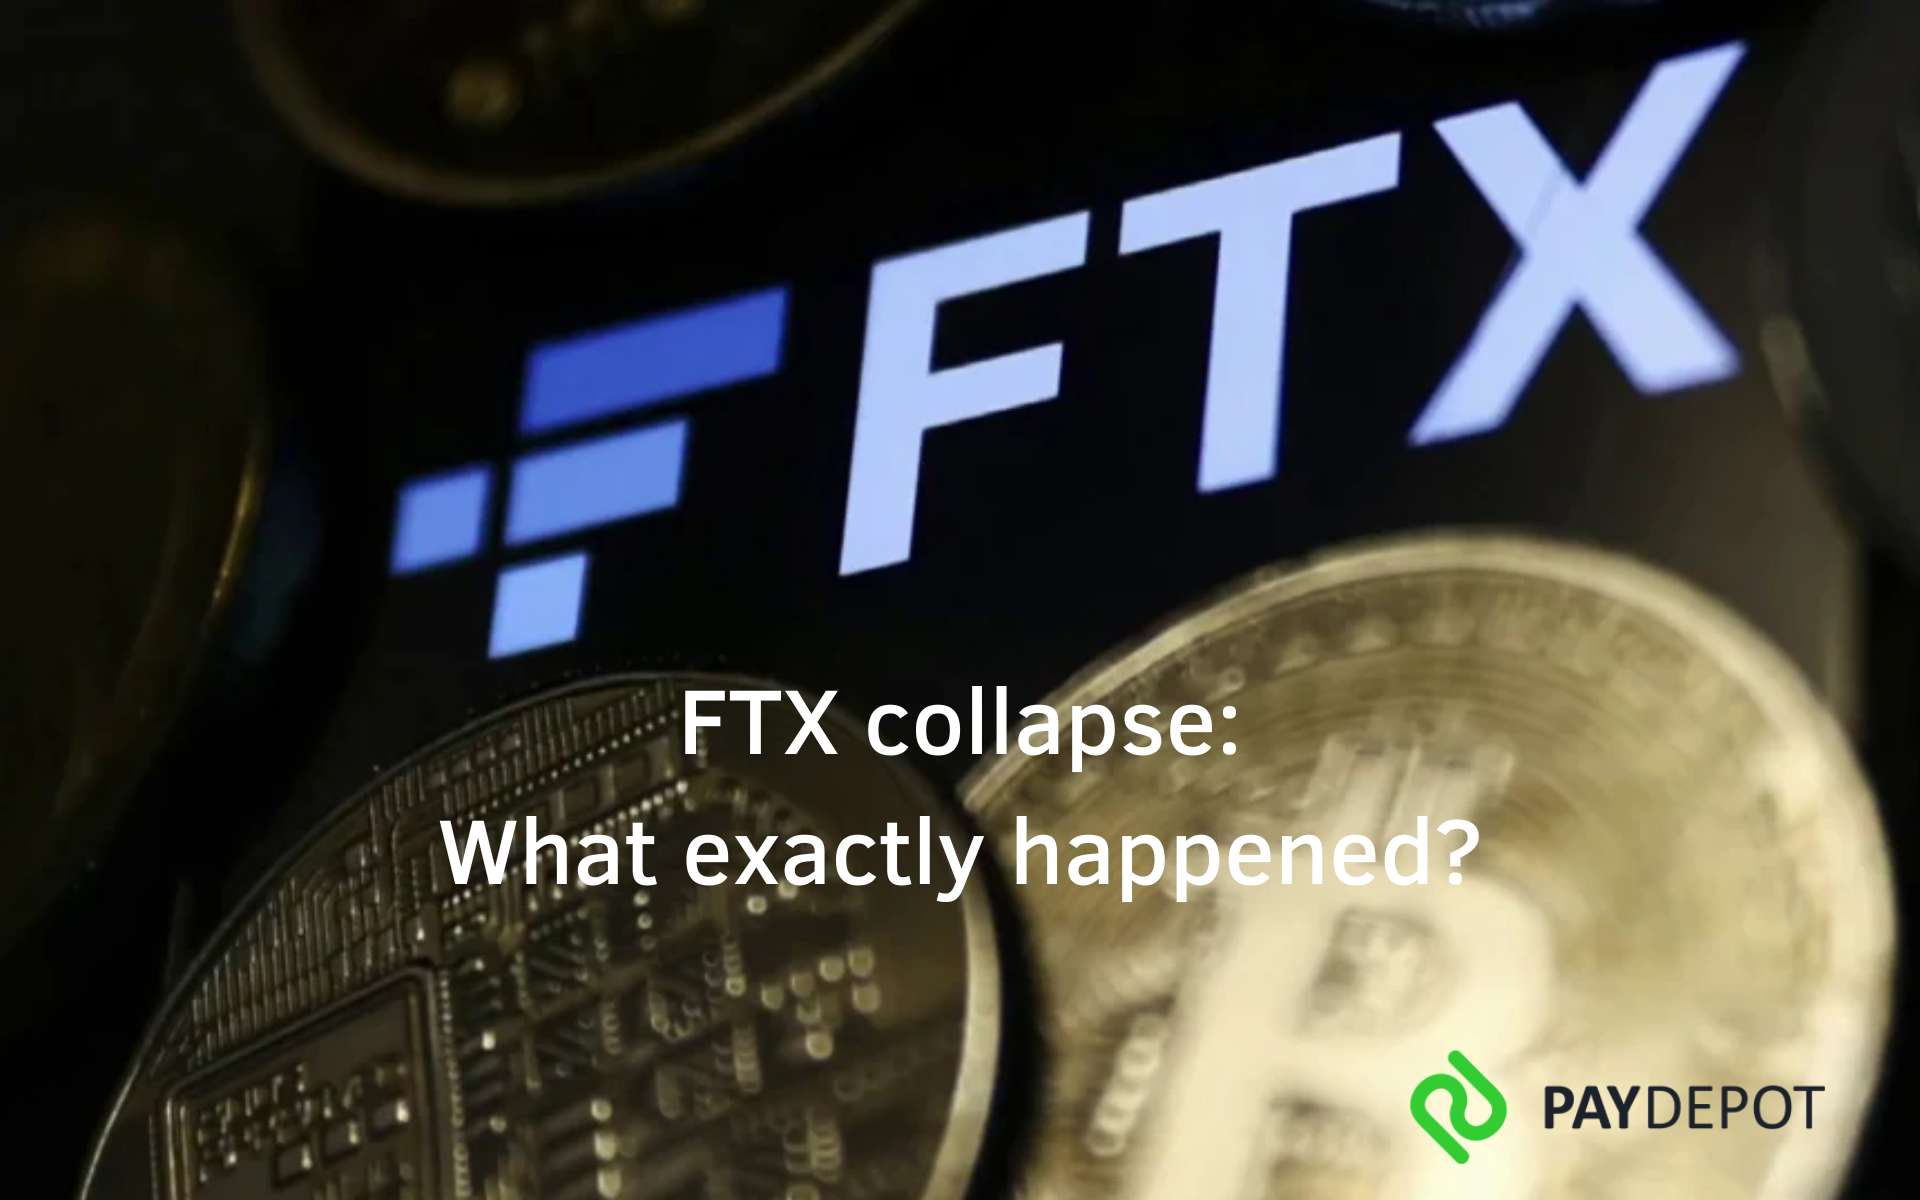 The collapse of FTX collapsed the entire cryptocurrency market - what happened?